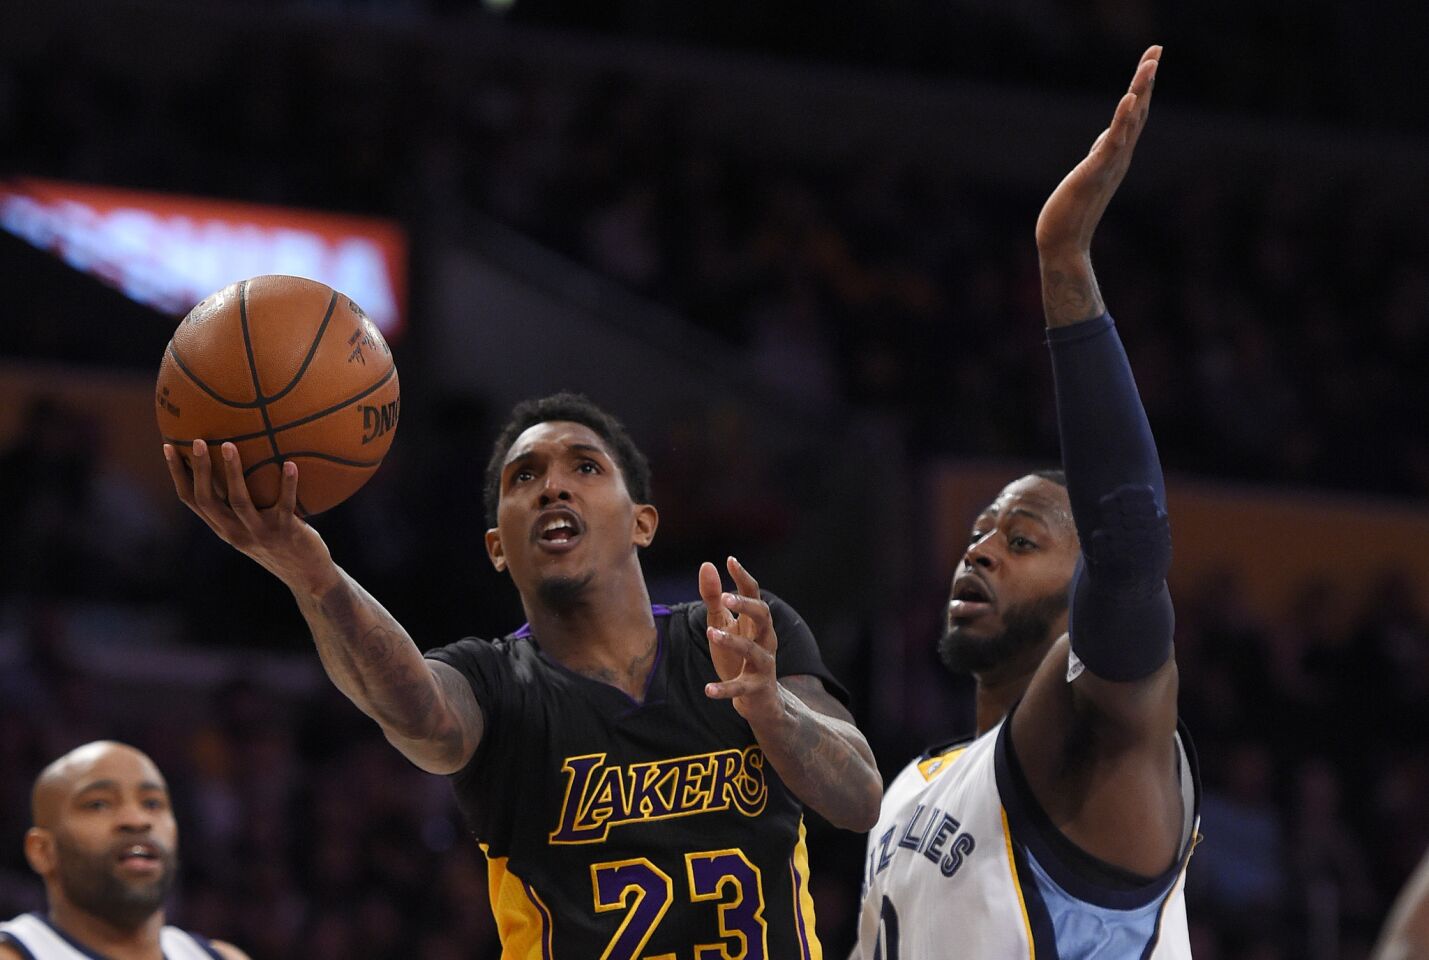 Lakers guard Lou Williams, left, shoots as Grizzlies forward JaMychal Green defends during the first half of a game on Feb. 26 at Staples Center.